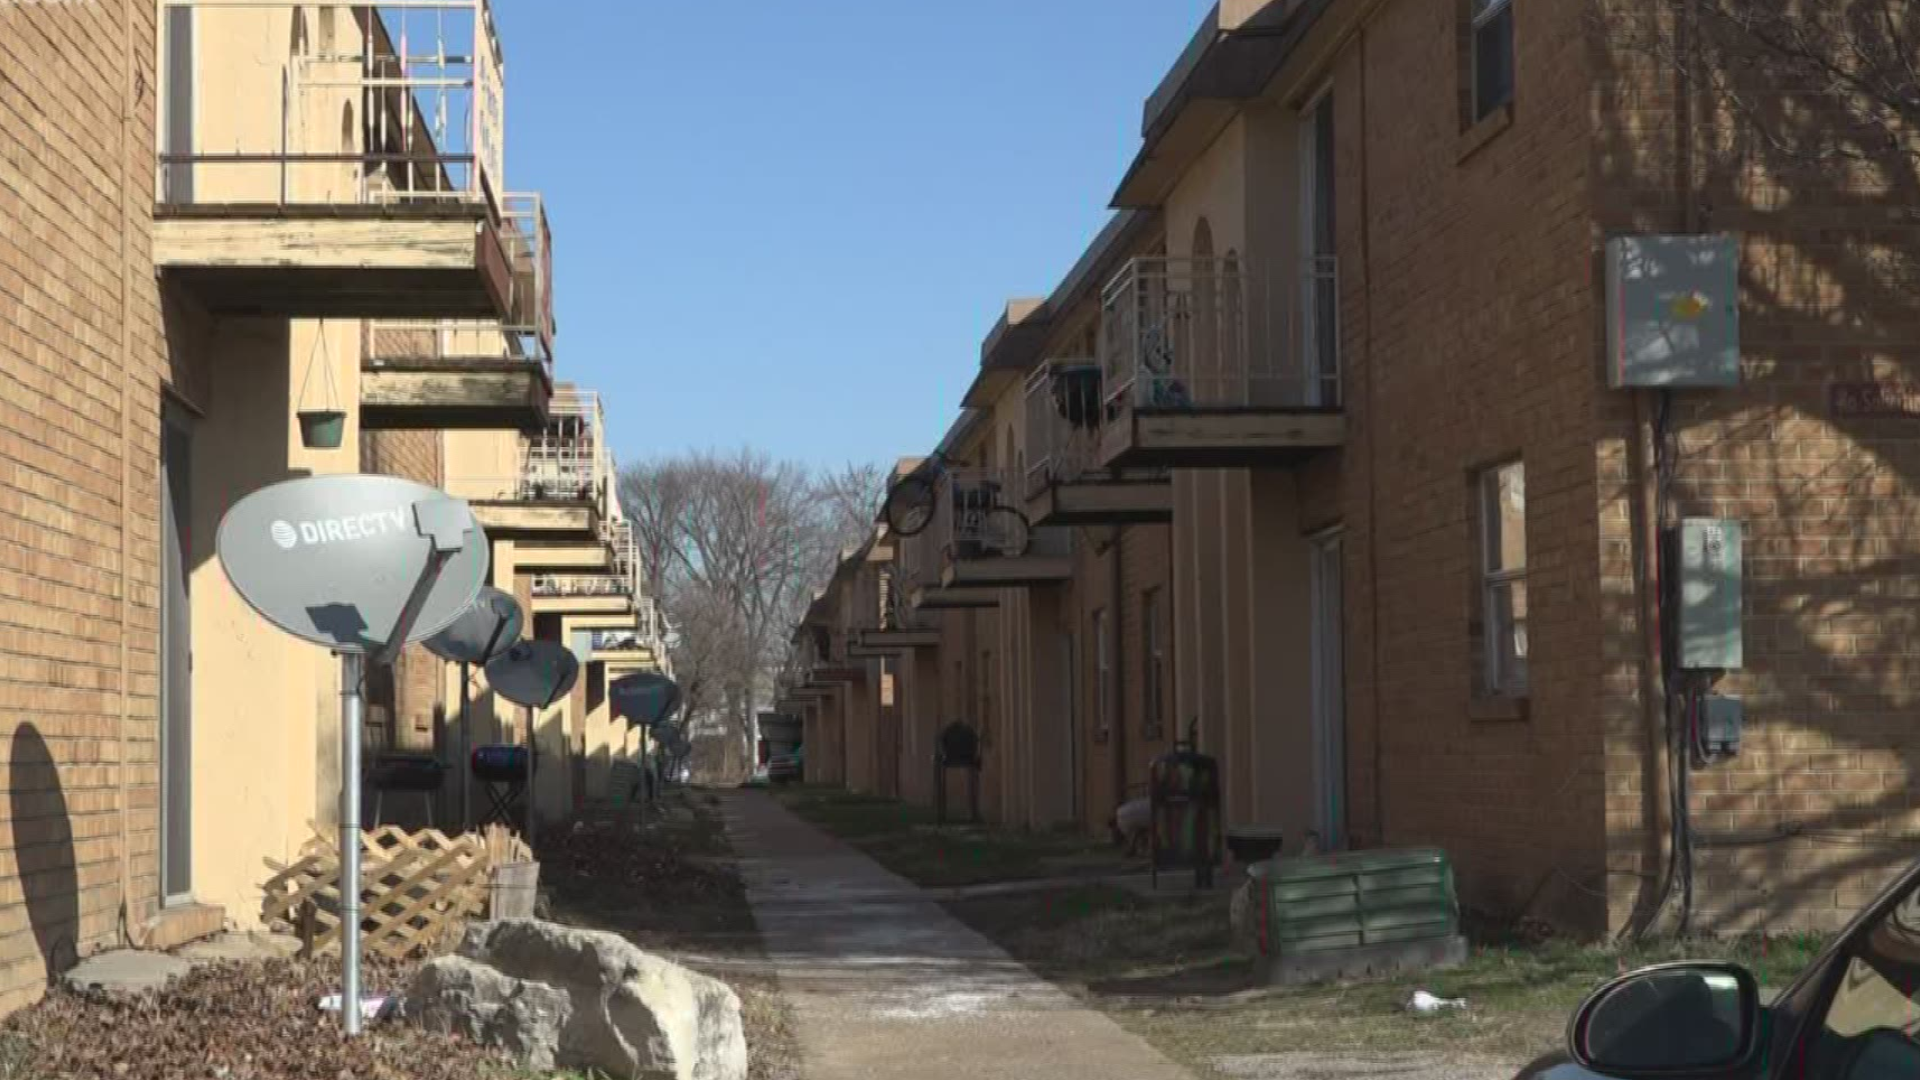 The city has filed a petition against the rental property owner, asking that it fix unlivable conditions or sell its property.